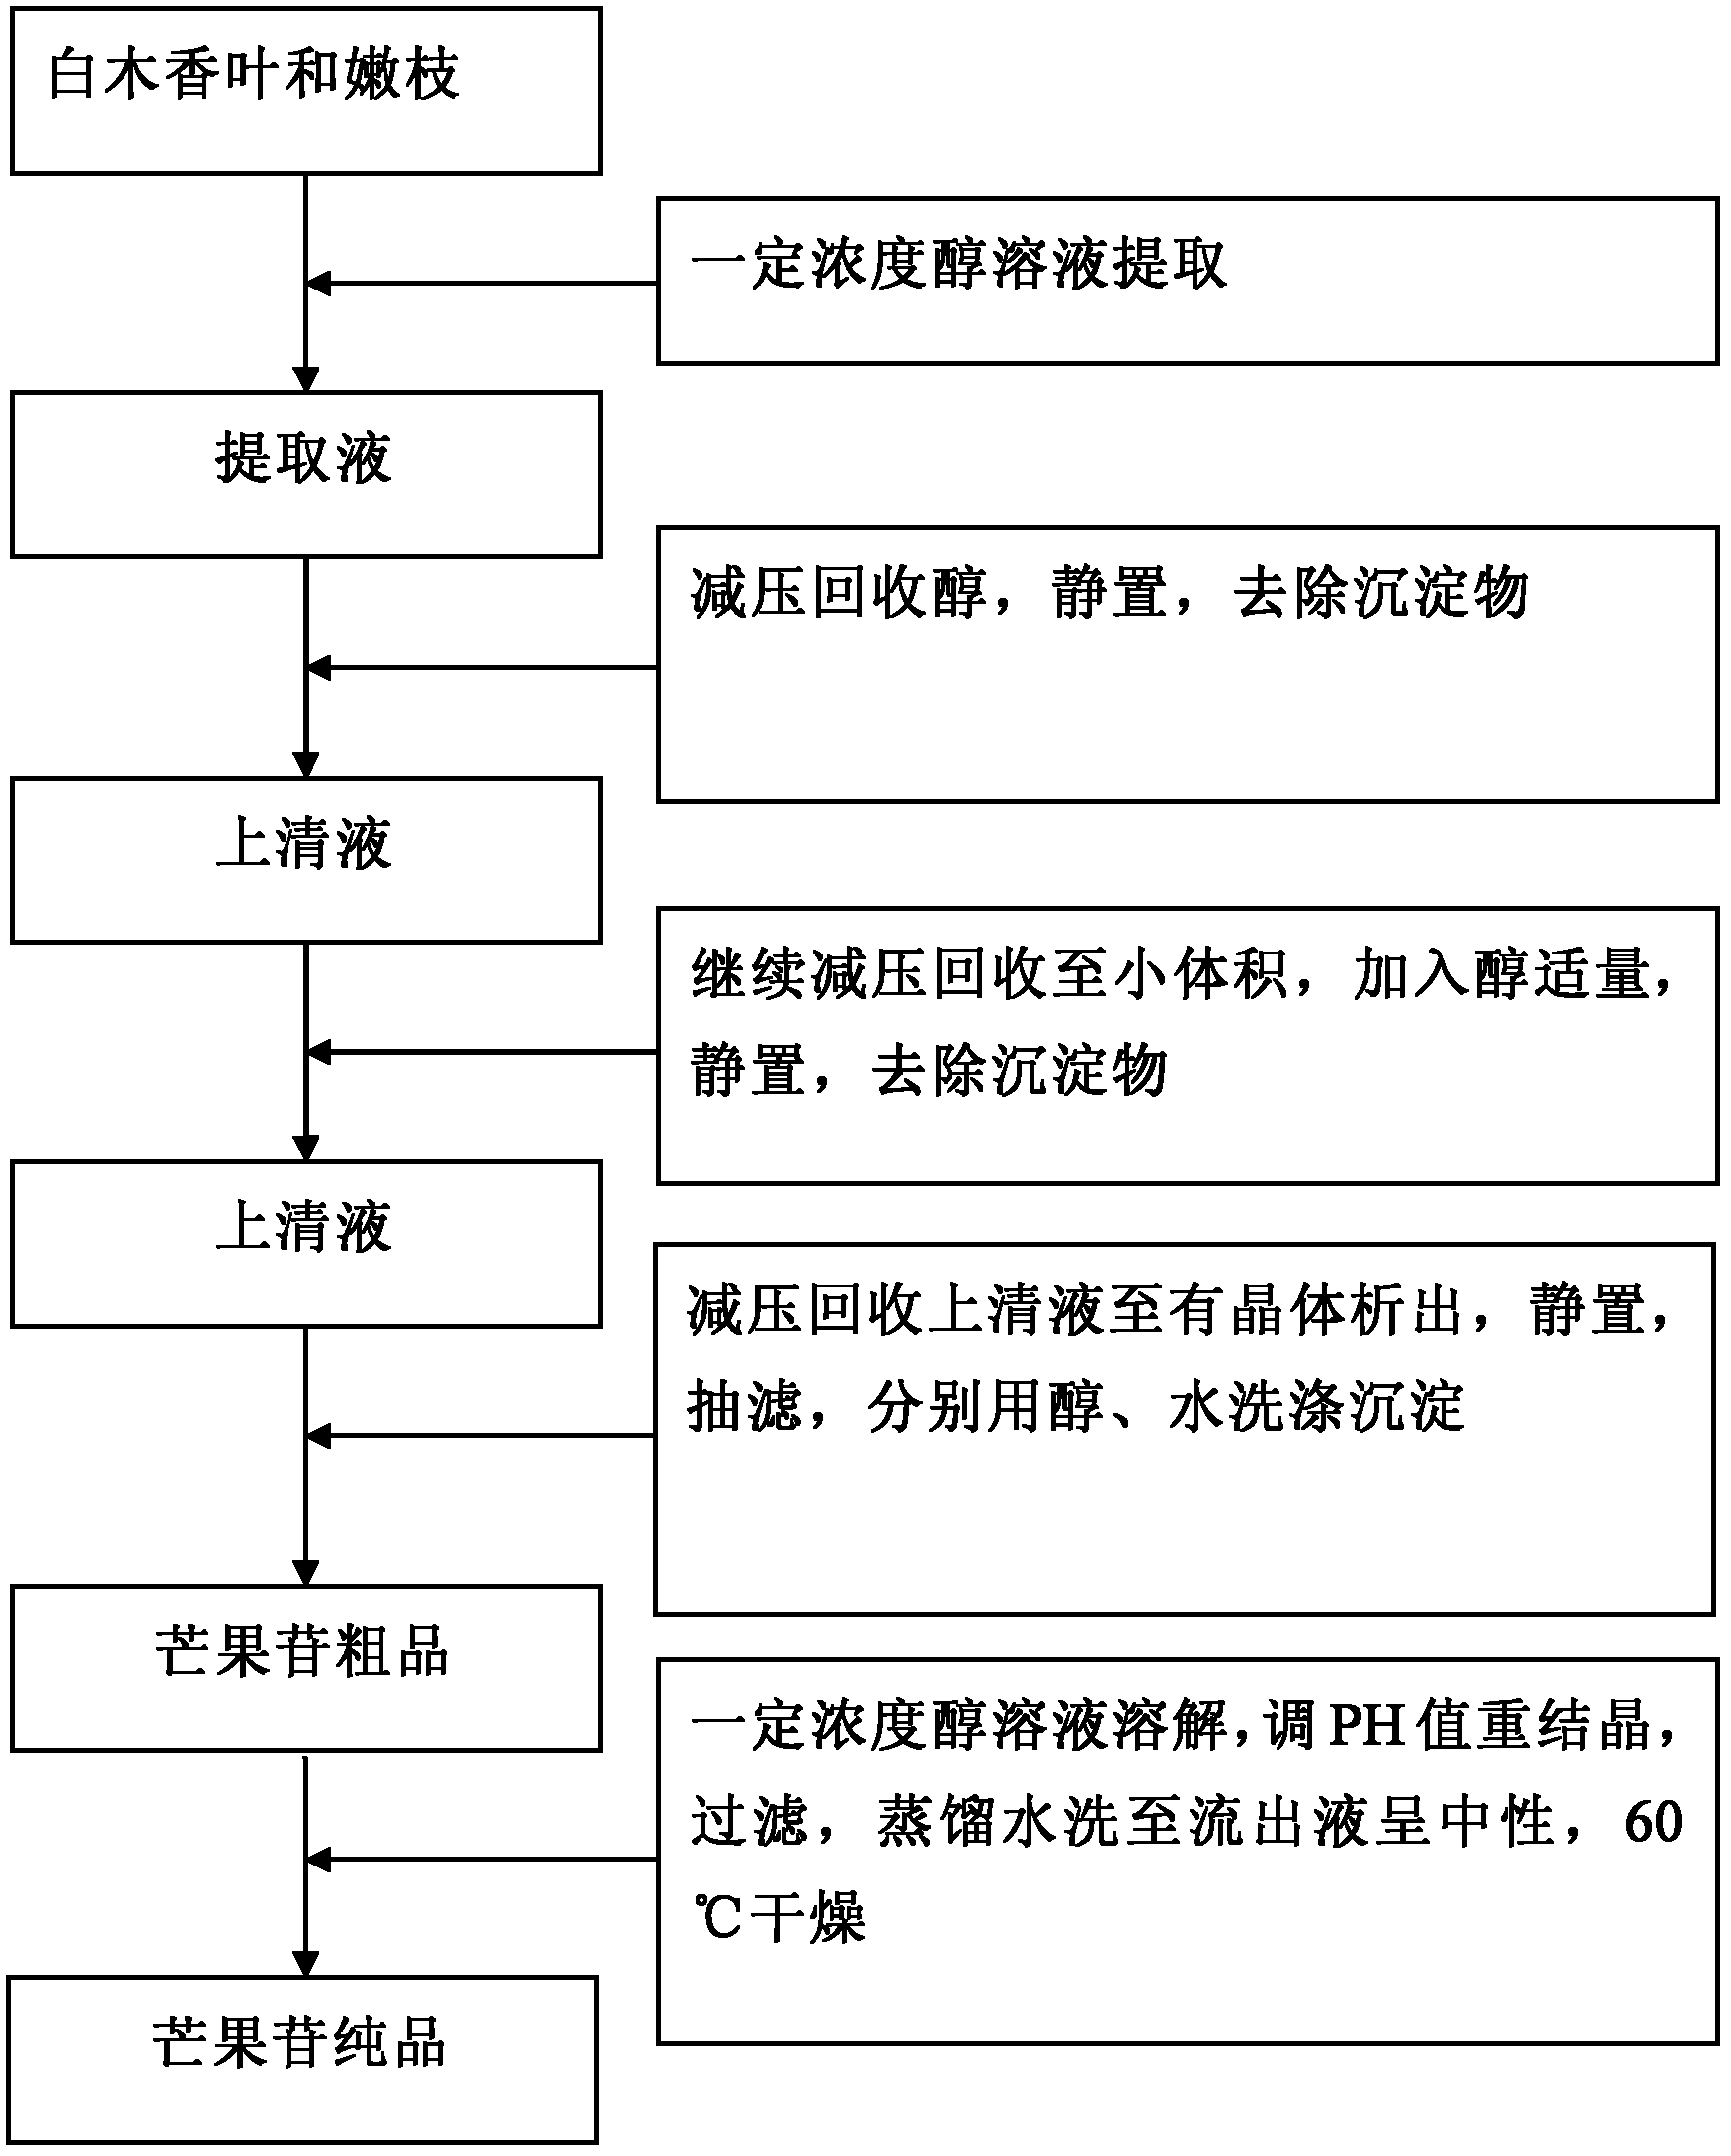 High-purity mangiferin prepared from leaves and twigs of aquilaria sinensis and preparation method thereof